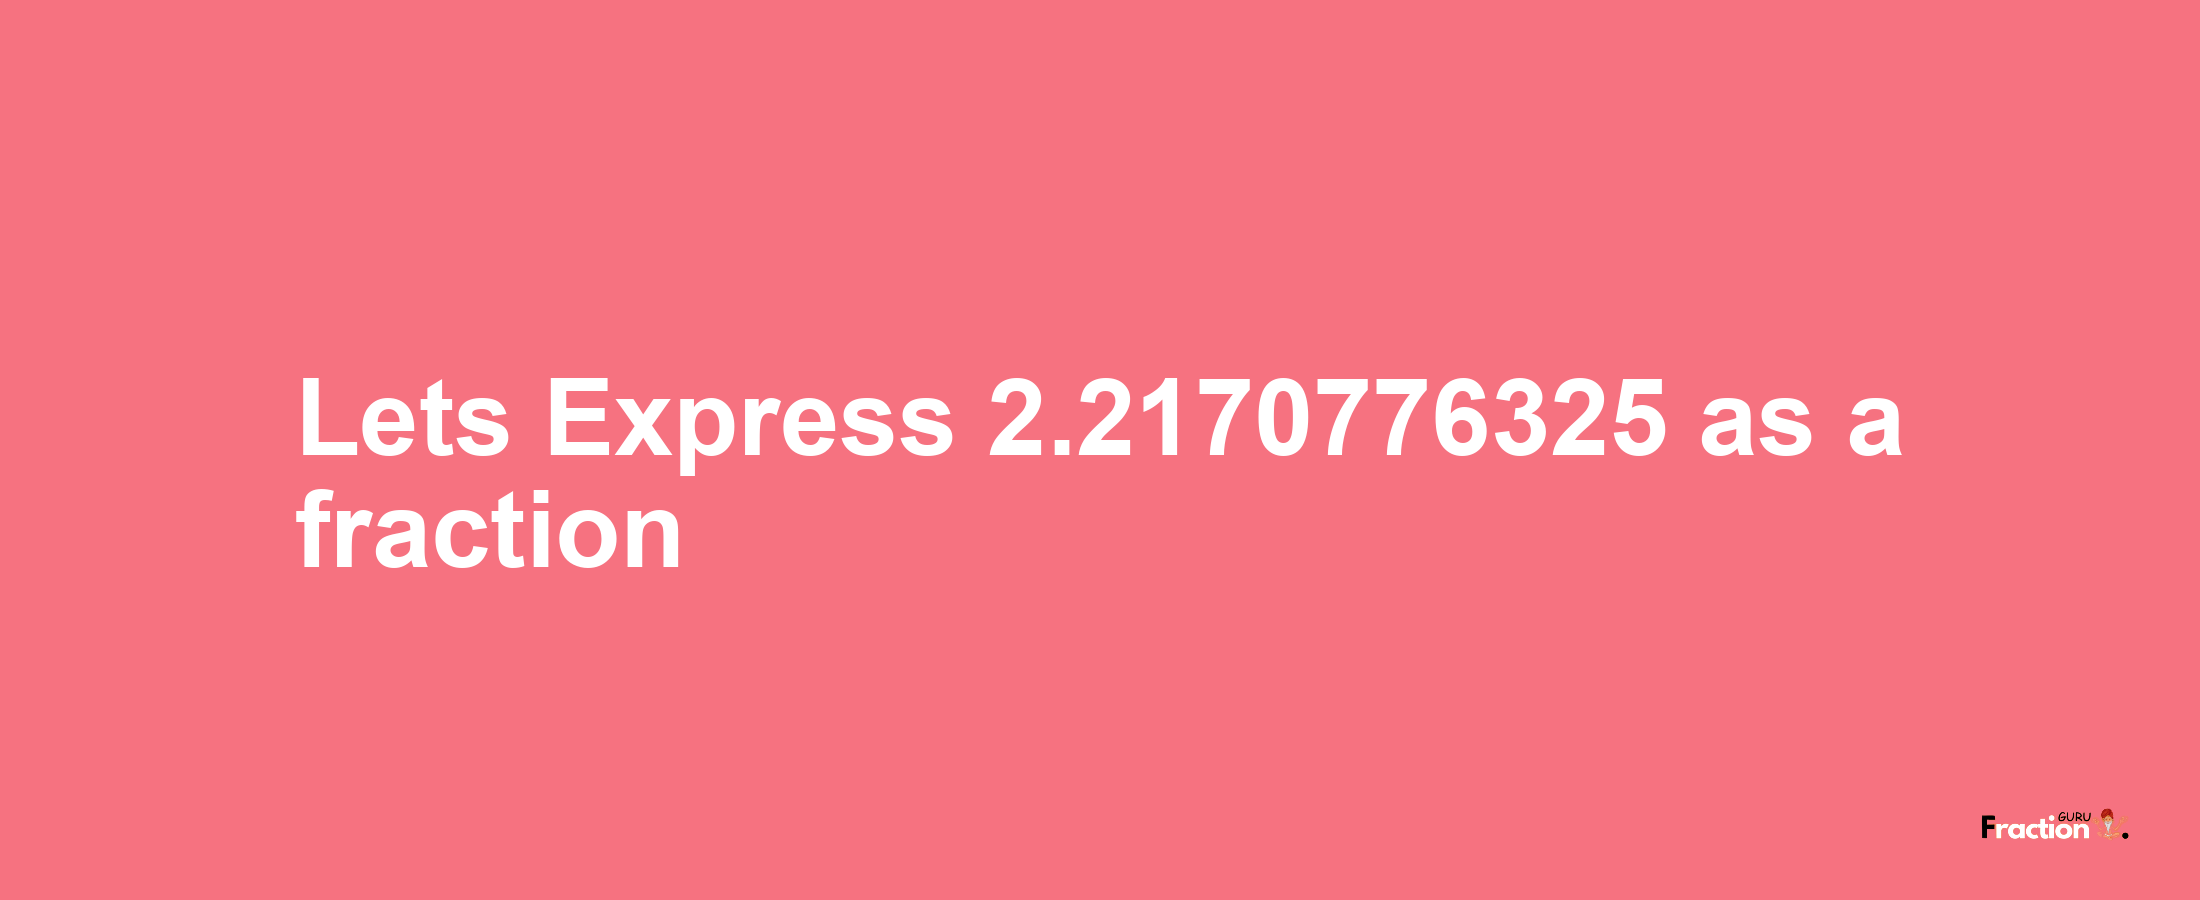 Lets Express 2.2170776325 as afraction